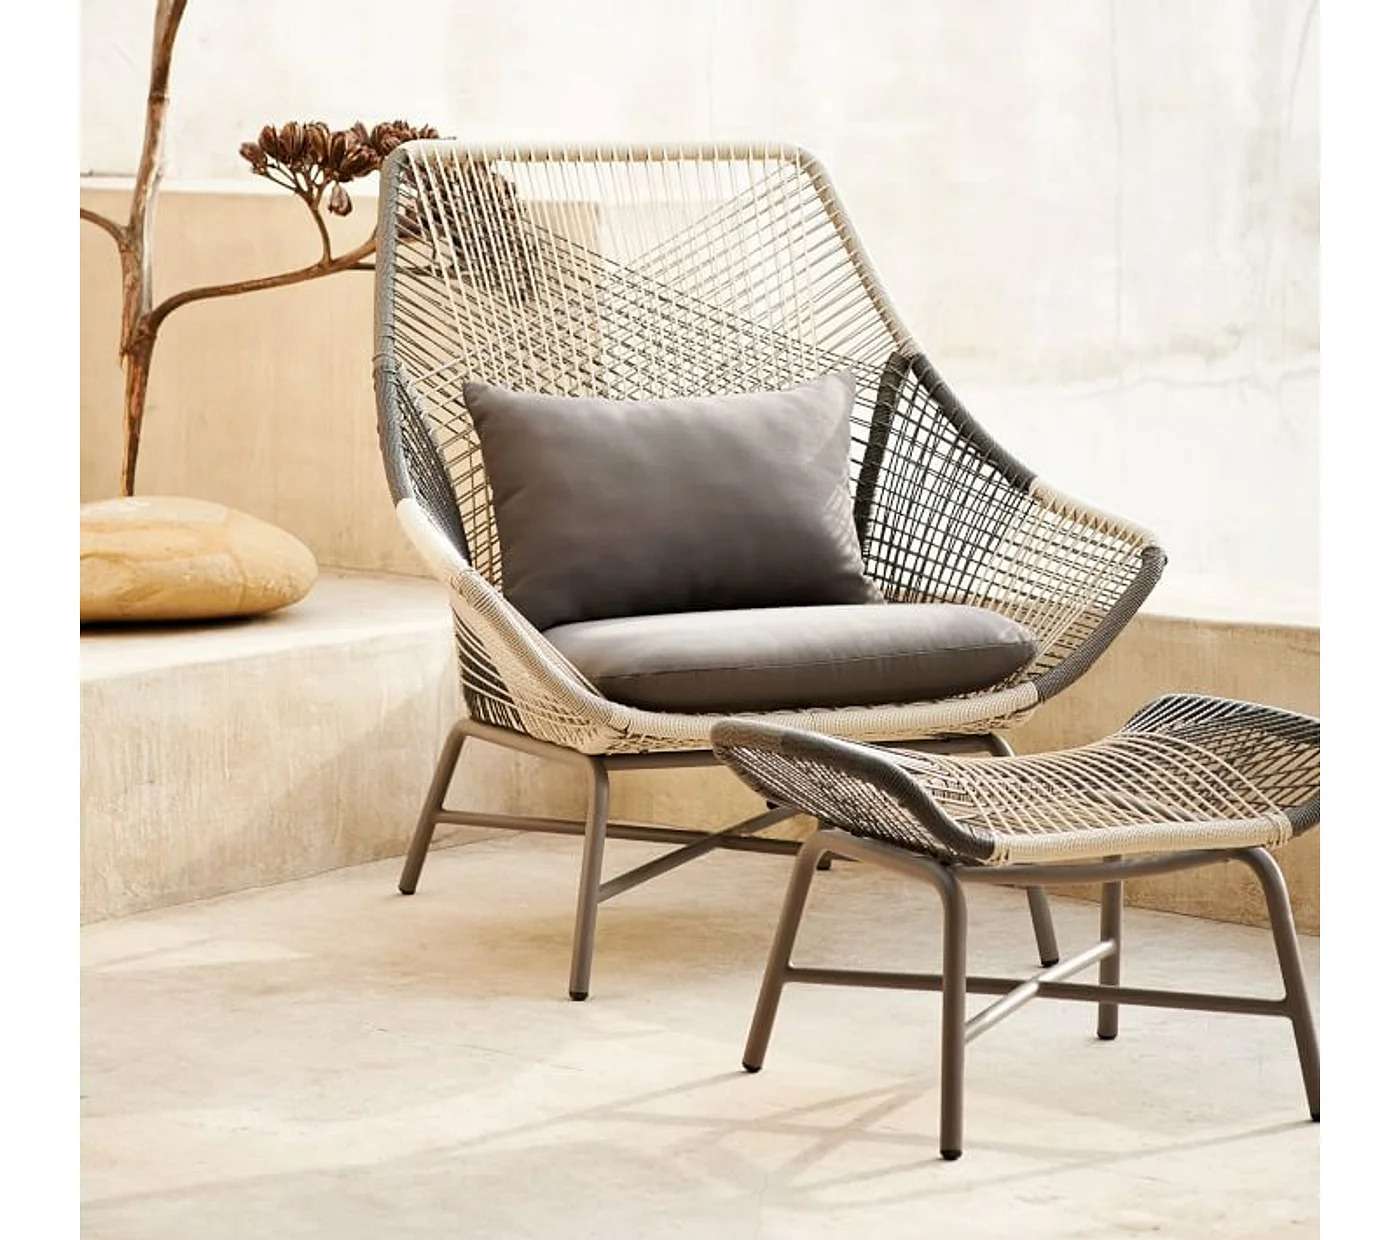 Uron Outdoor Lounge Chair